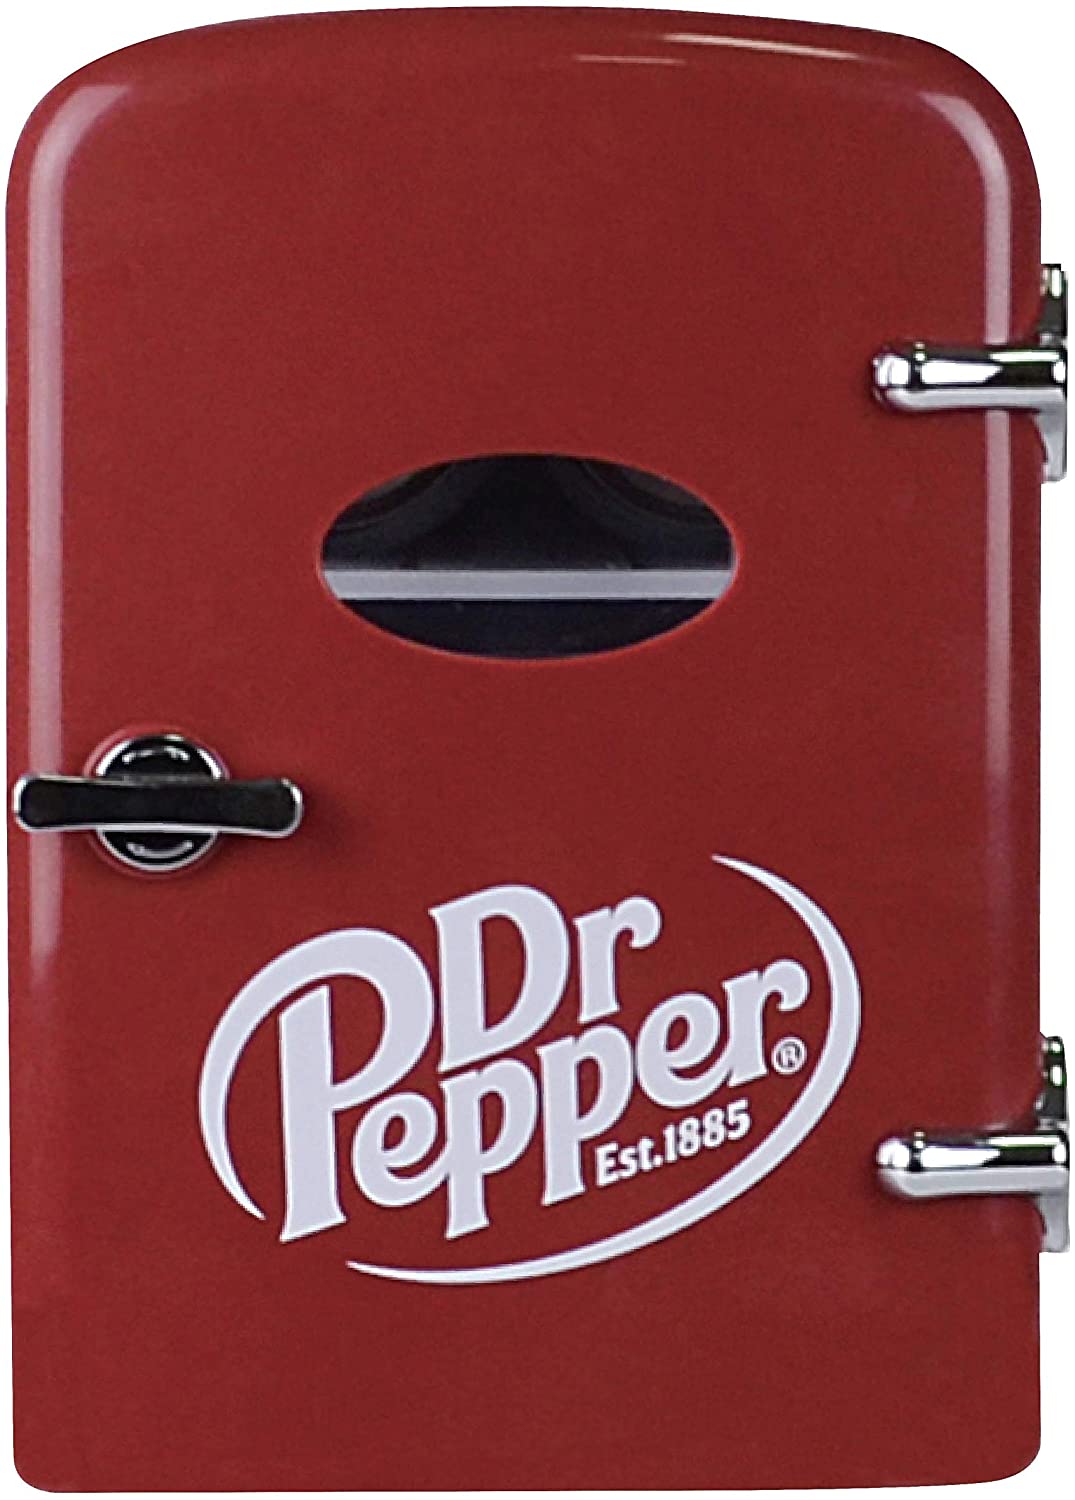 CURTIS MIS135DRP DR. Pepper Mini Portable Compact Personal Fridge Cools & Heats, 4 Liter Capacity, 6 Cans, Makeup, Skincare, Freon-Free & Eco Friendly, Includes Home Plug & 12V Car Charger, MAROON